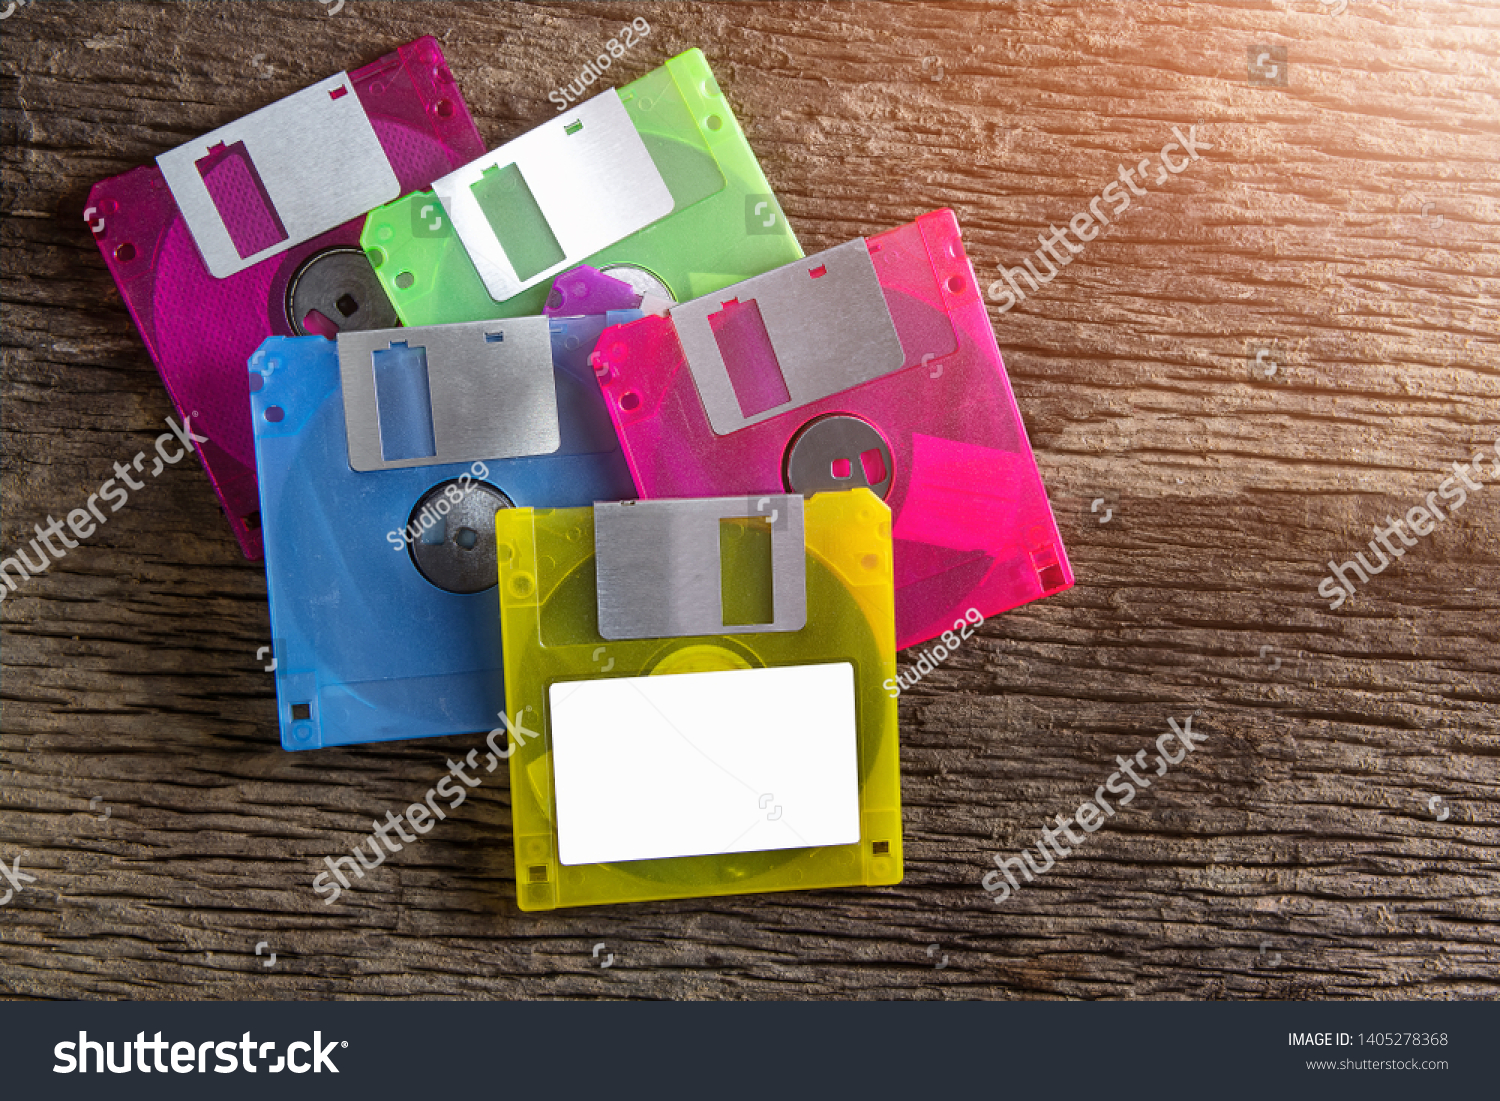 Floppy disks on a wooden table background. #1405278368